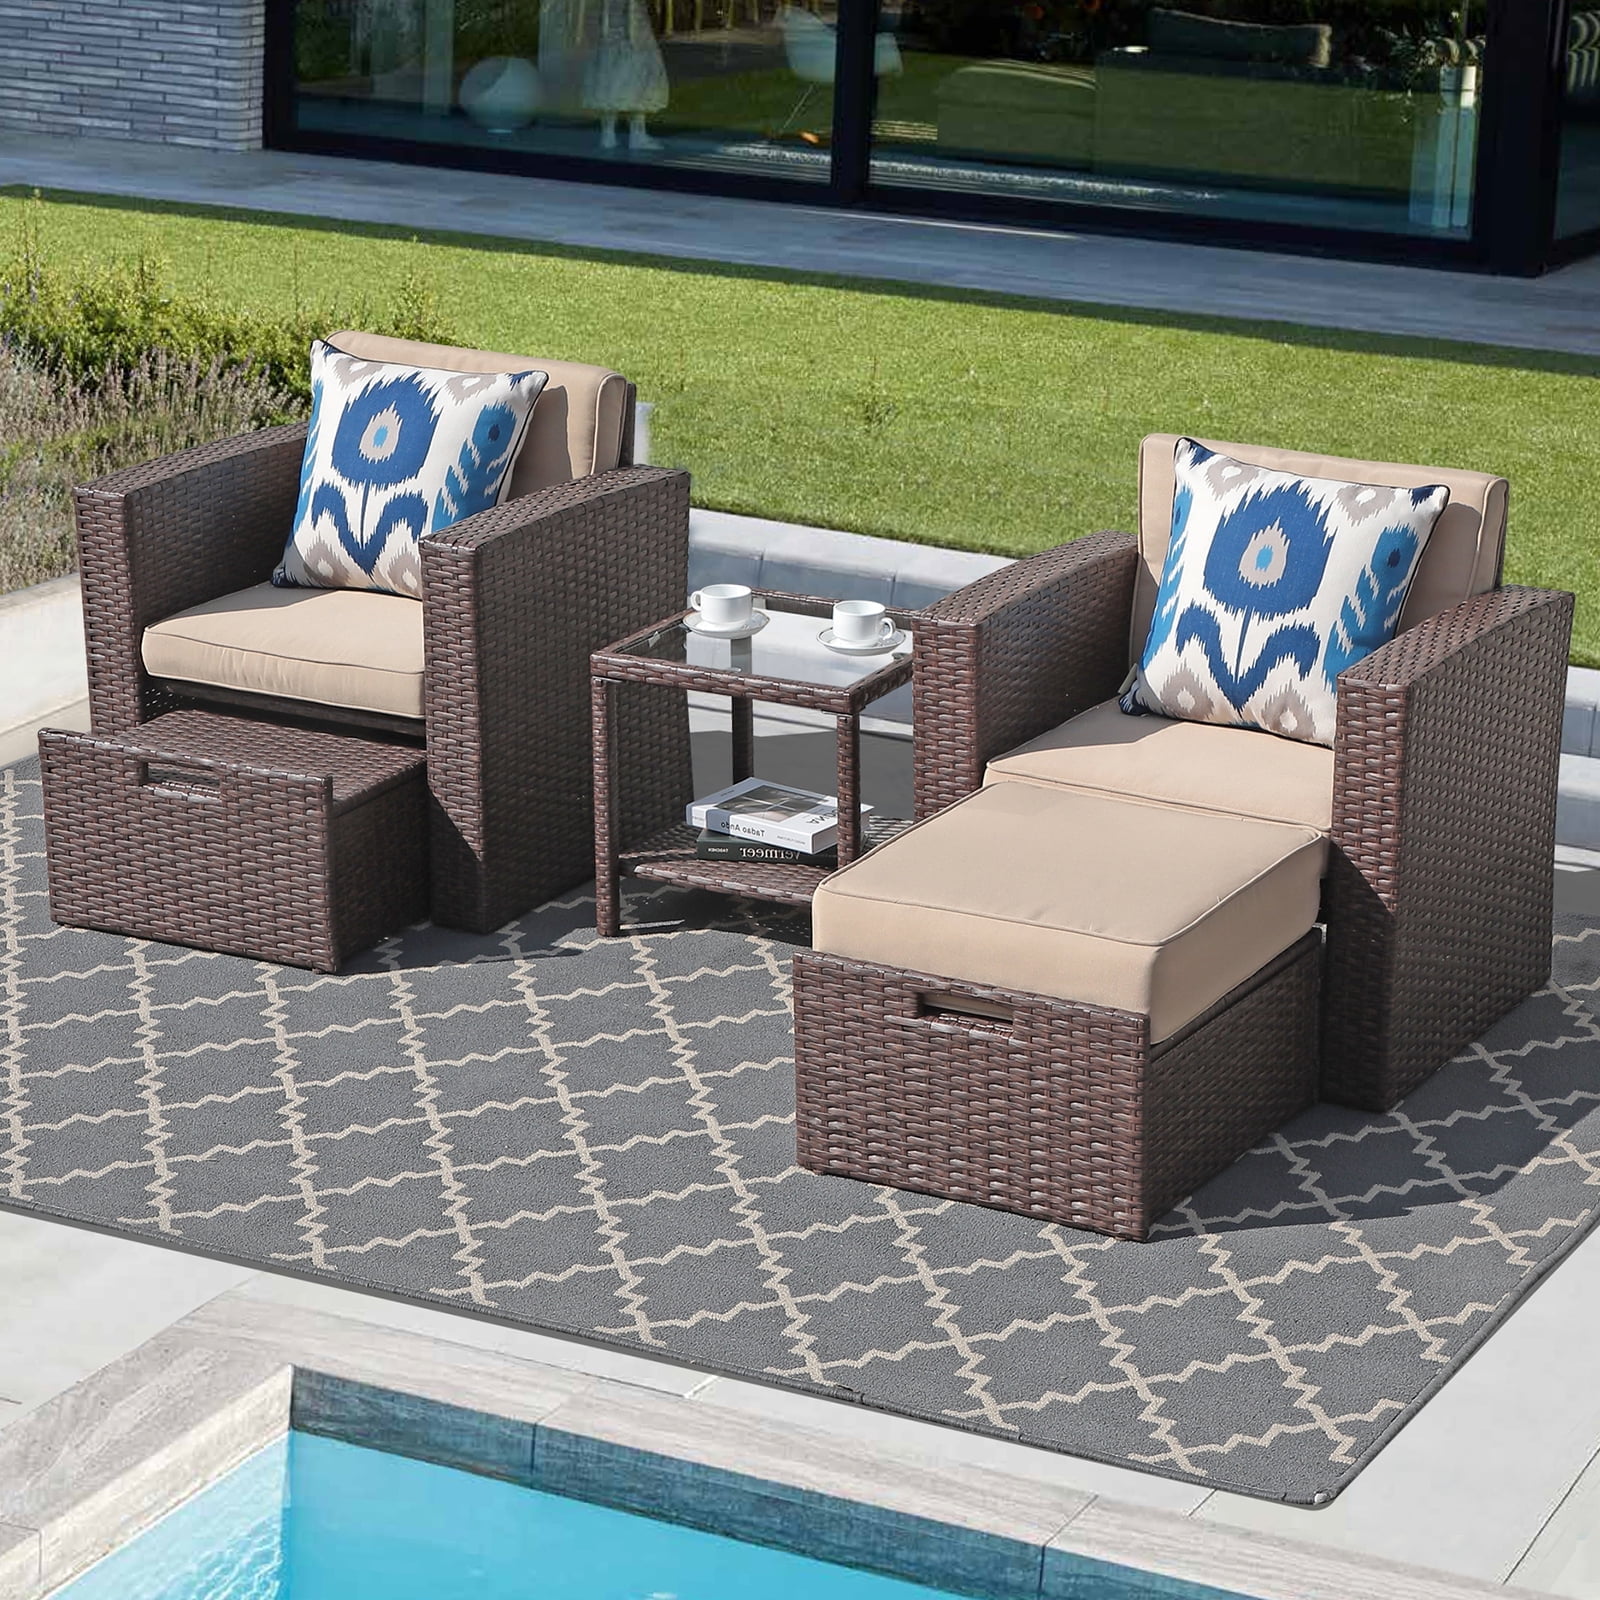 JOIVI 5 Pieces Patio Furniture Set, Outdoor Brown PE Rattan Wicker Patio Conversation Set, Lounge Chairs with Cushioned Ottoman and Tempered Glass Side Table - image 1 of 9